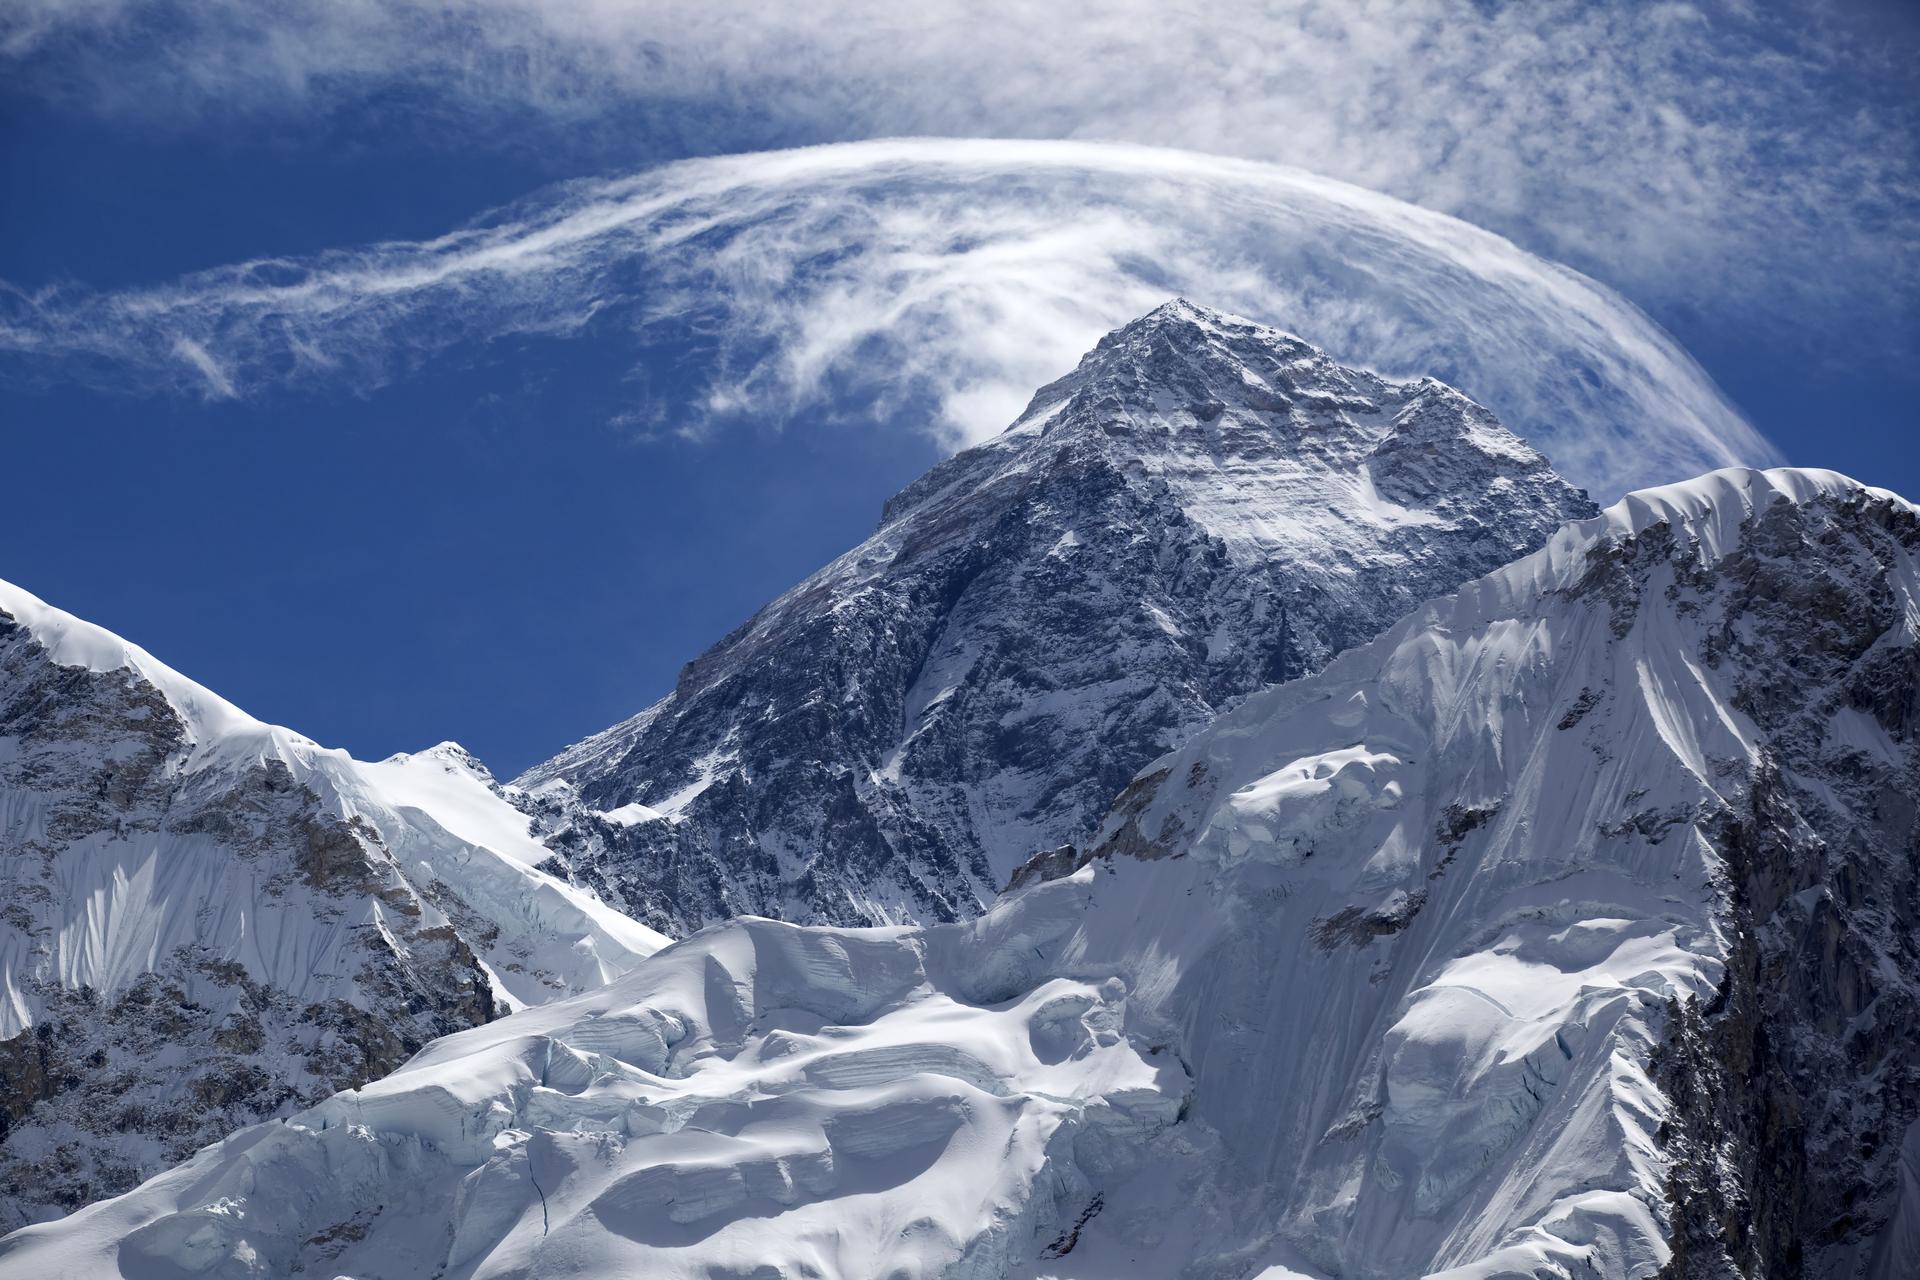 Mount Everest is not what it used to be. Photo: Thinkstock